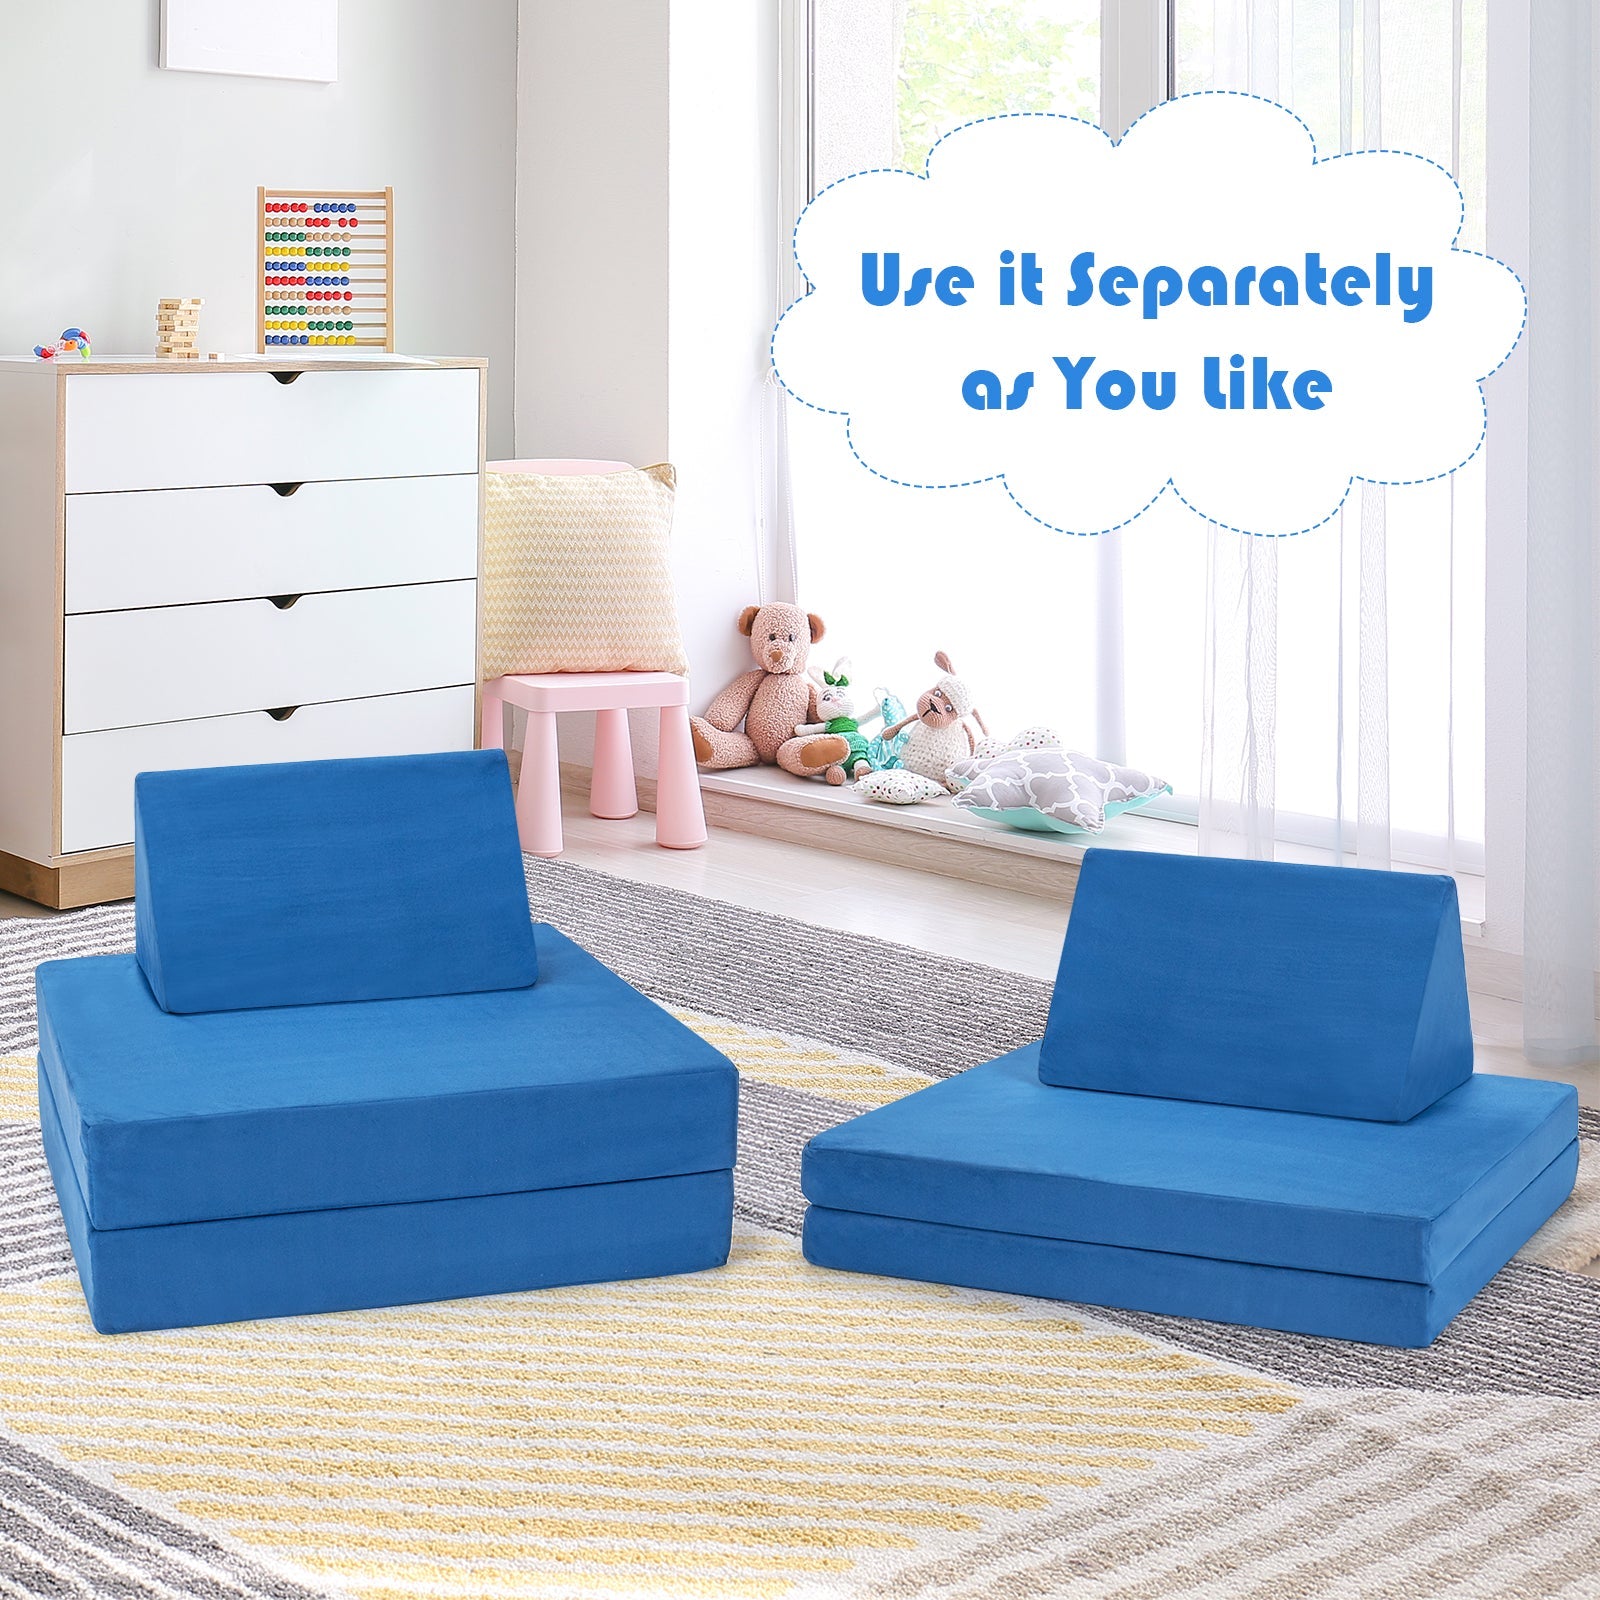 Bundle of Convertible Toddler Couch and 2 Foldable Mats - 4-Piece - Blue